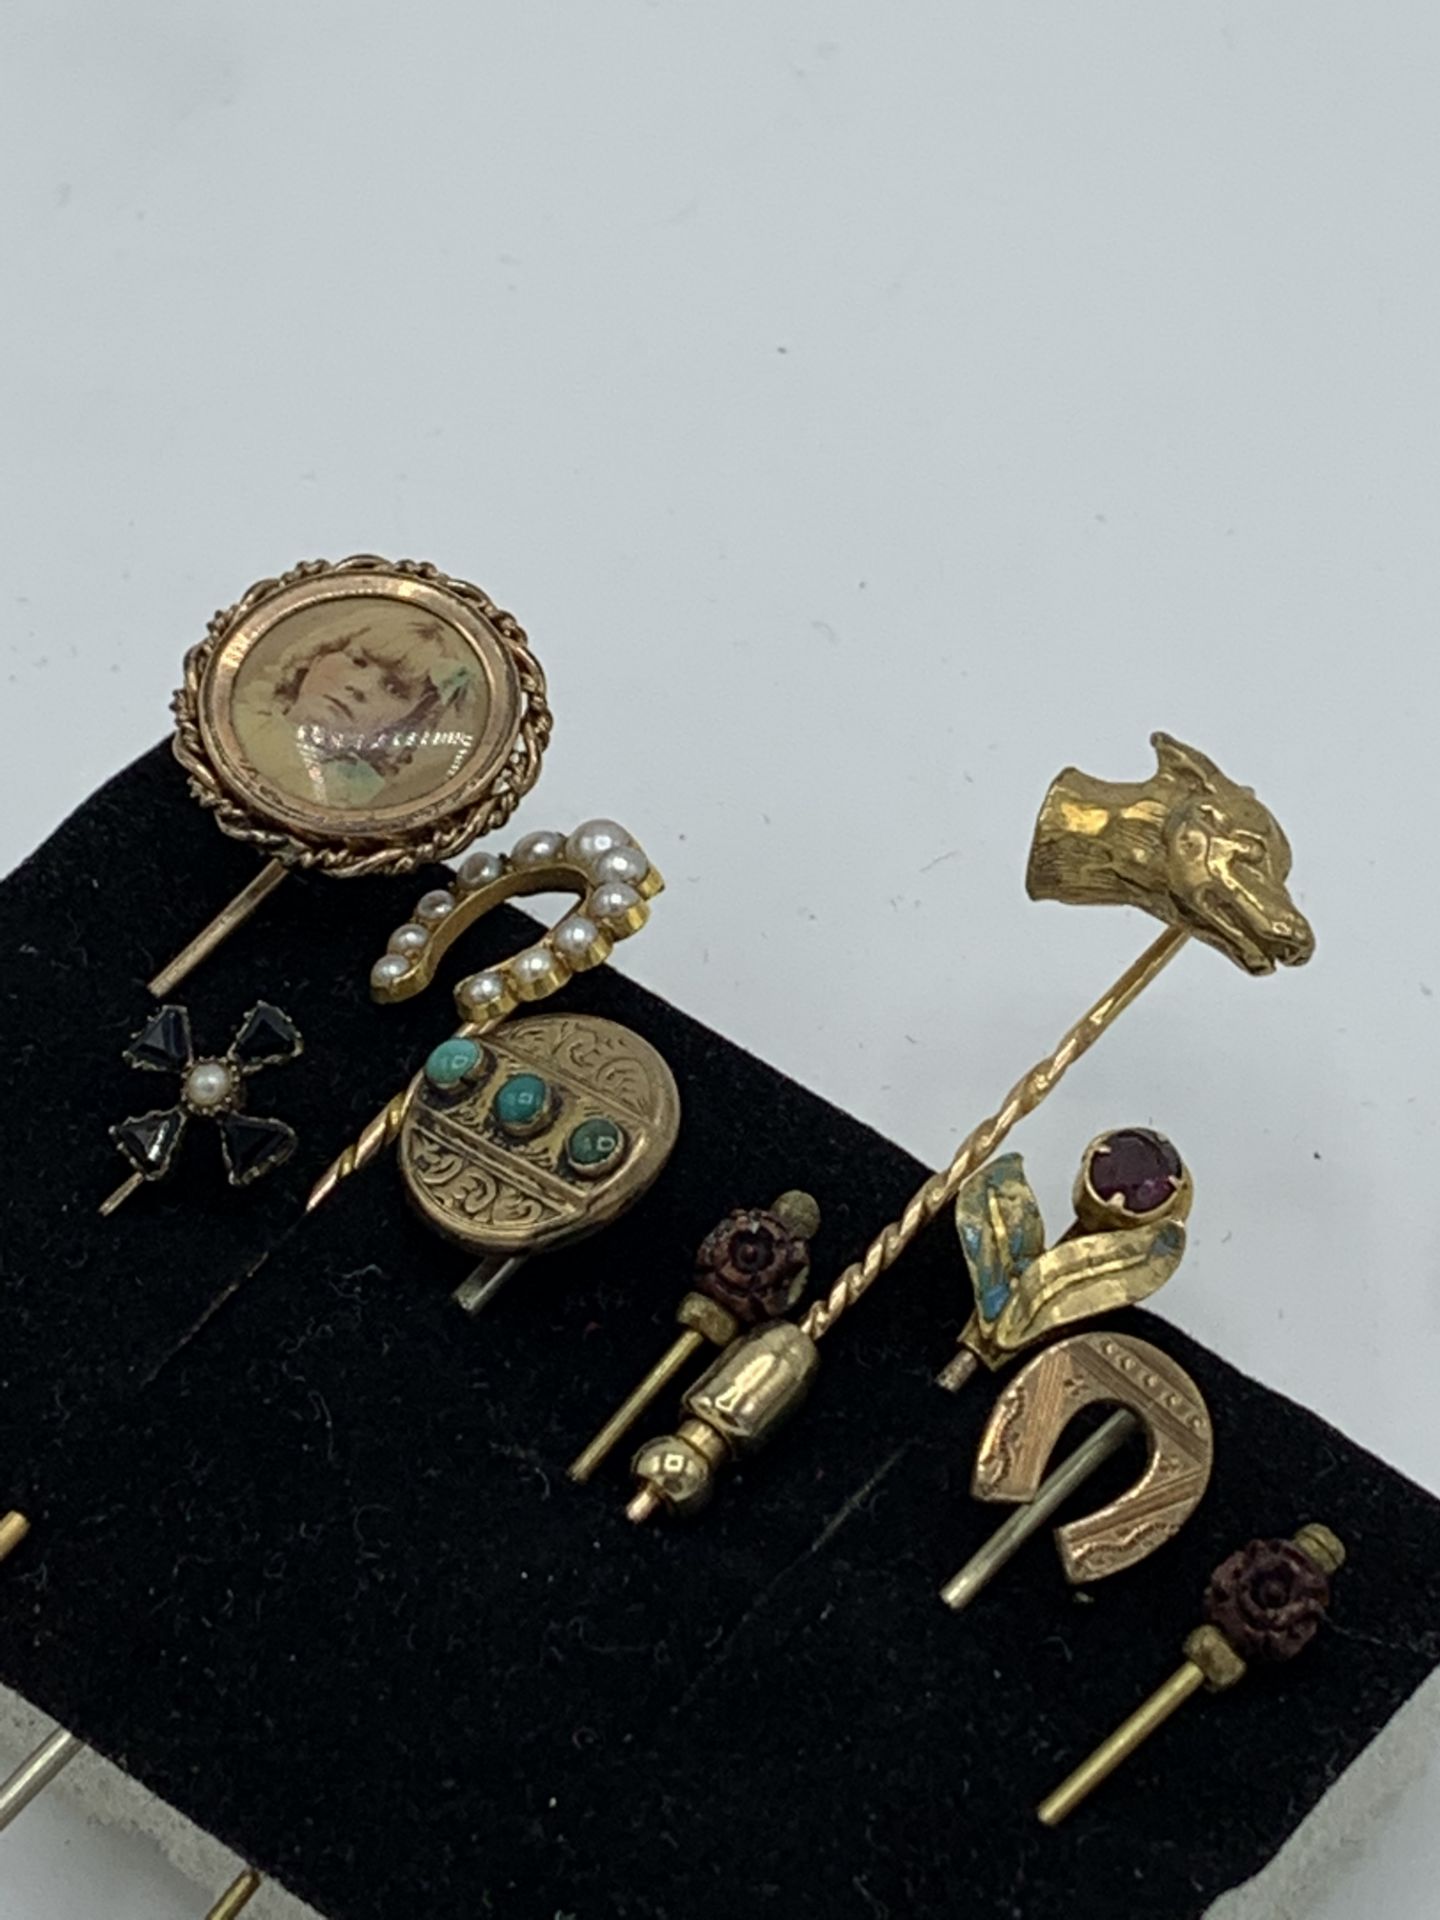 2 x 9ct gold stick pins and 9 others. Estimate £20-30. - Image 2 of 3